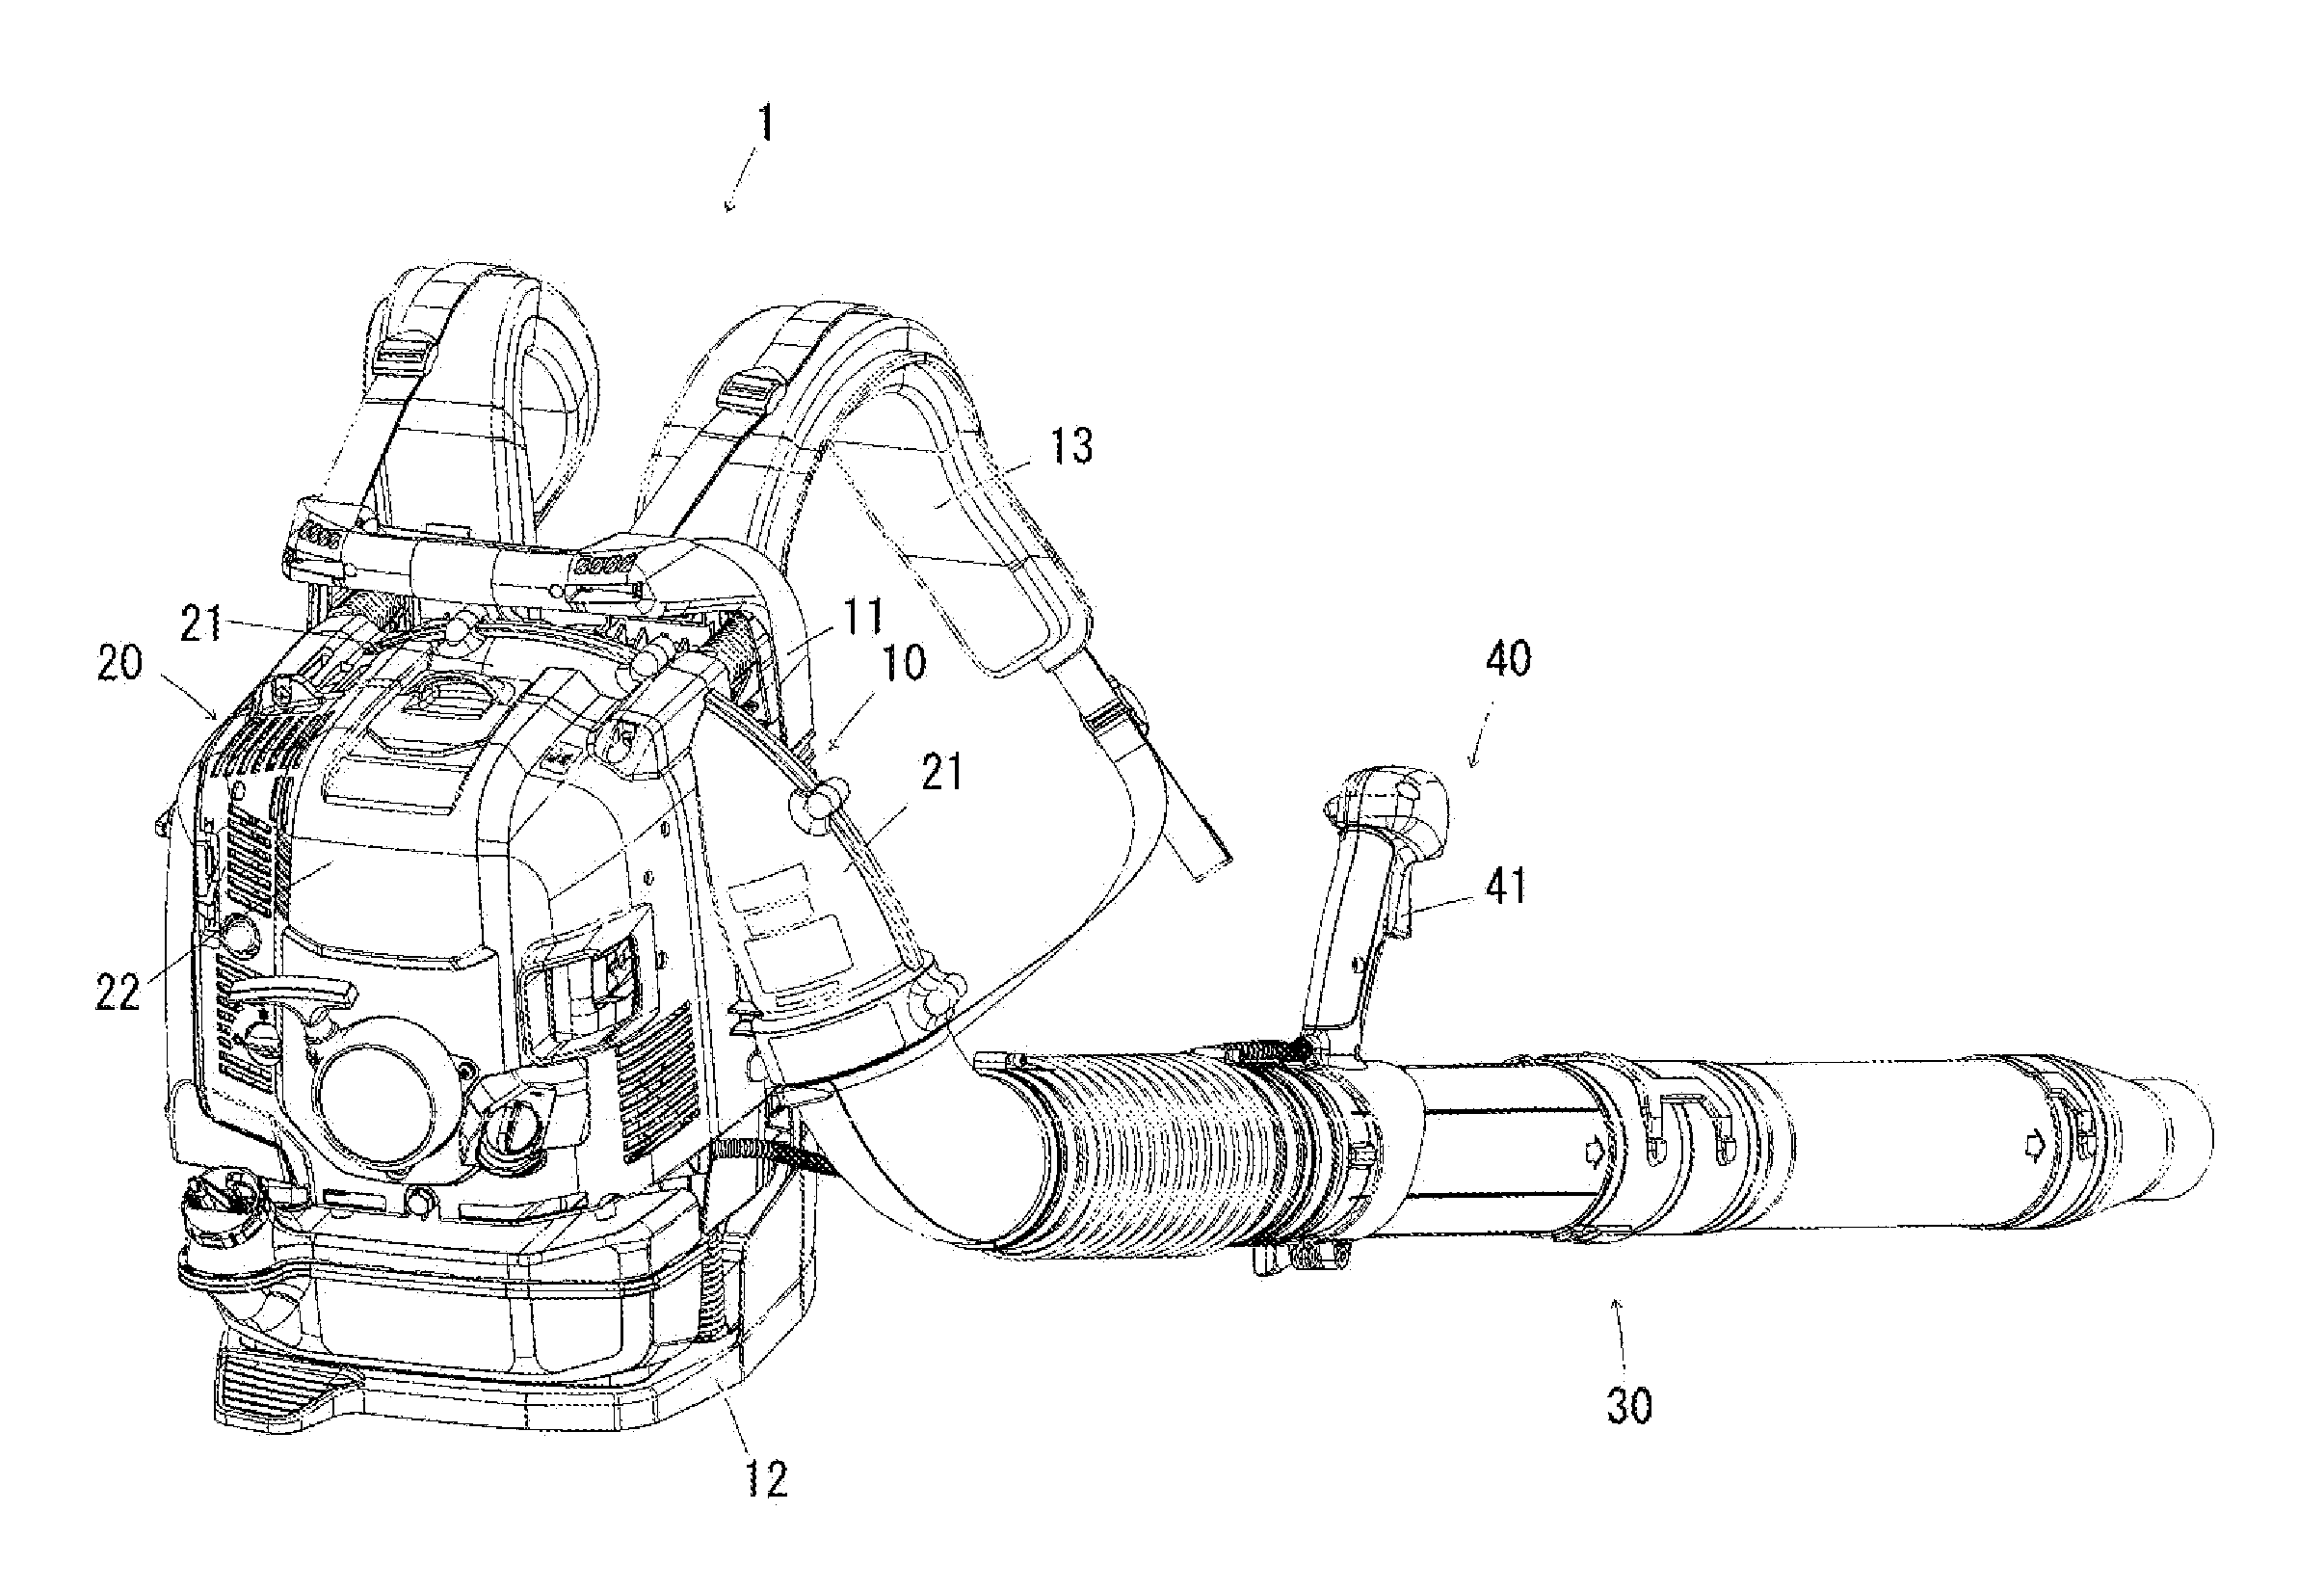 Power-operated work apparatus